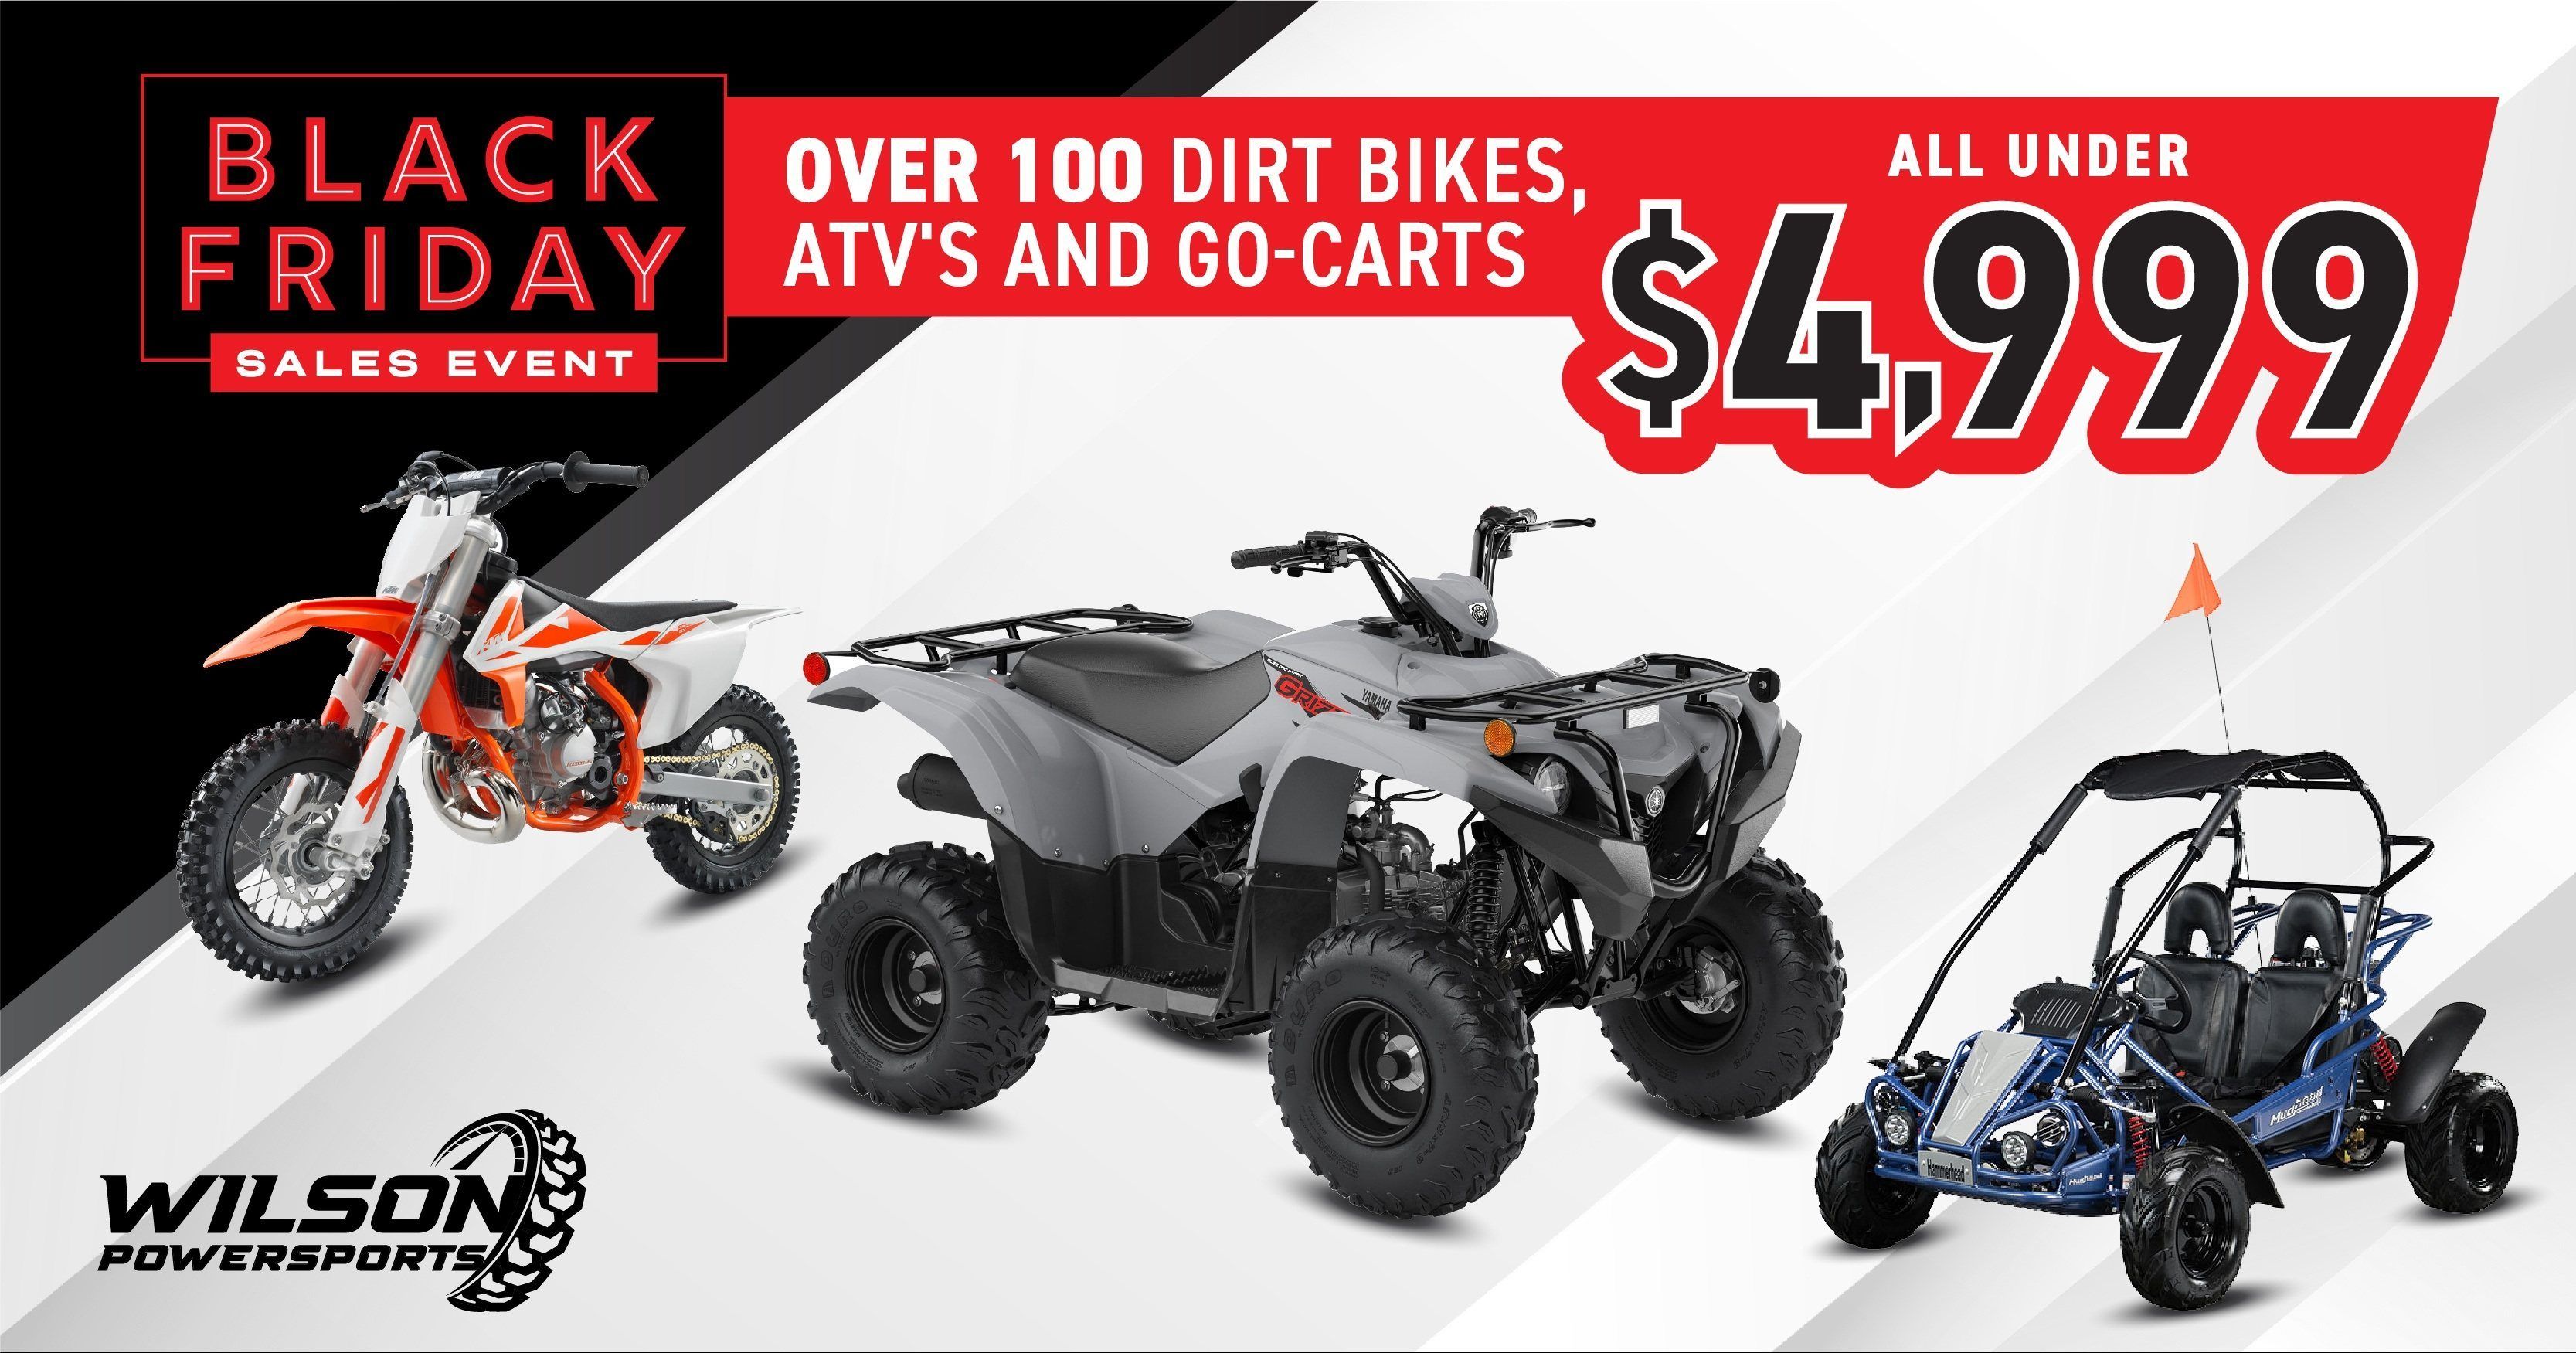 Wilson Powersports Black Friday Sale over 100 dirt bikes, ATVs and Go-carts under $4999